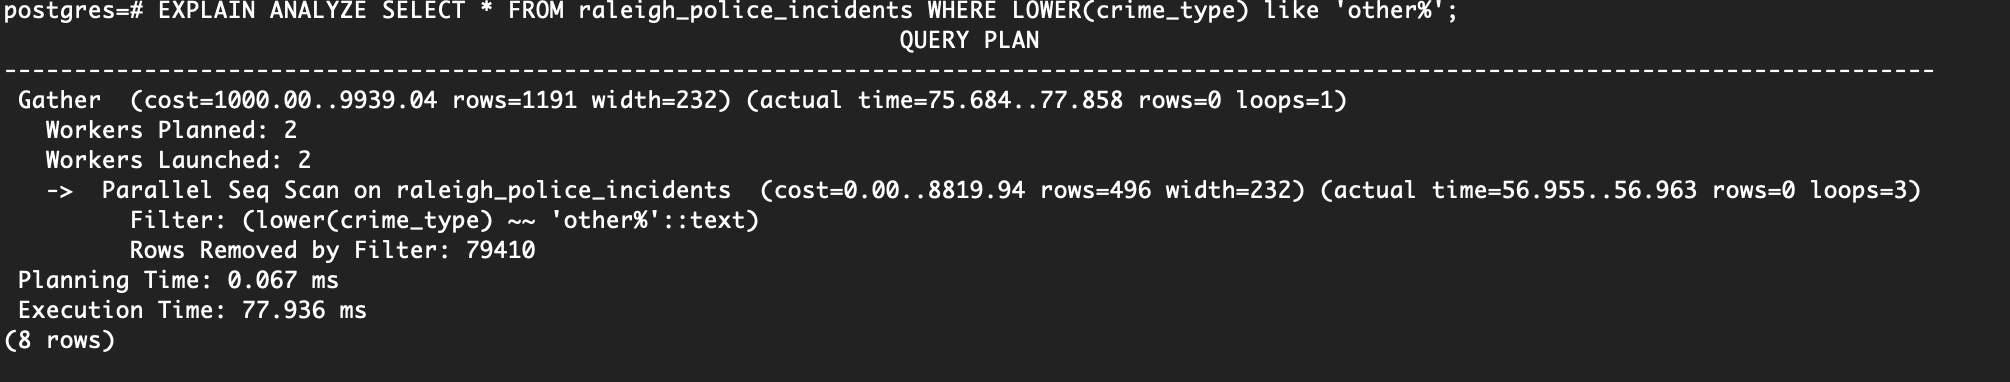 like query on crime description with index